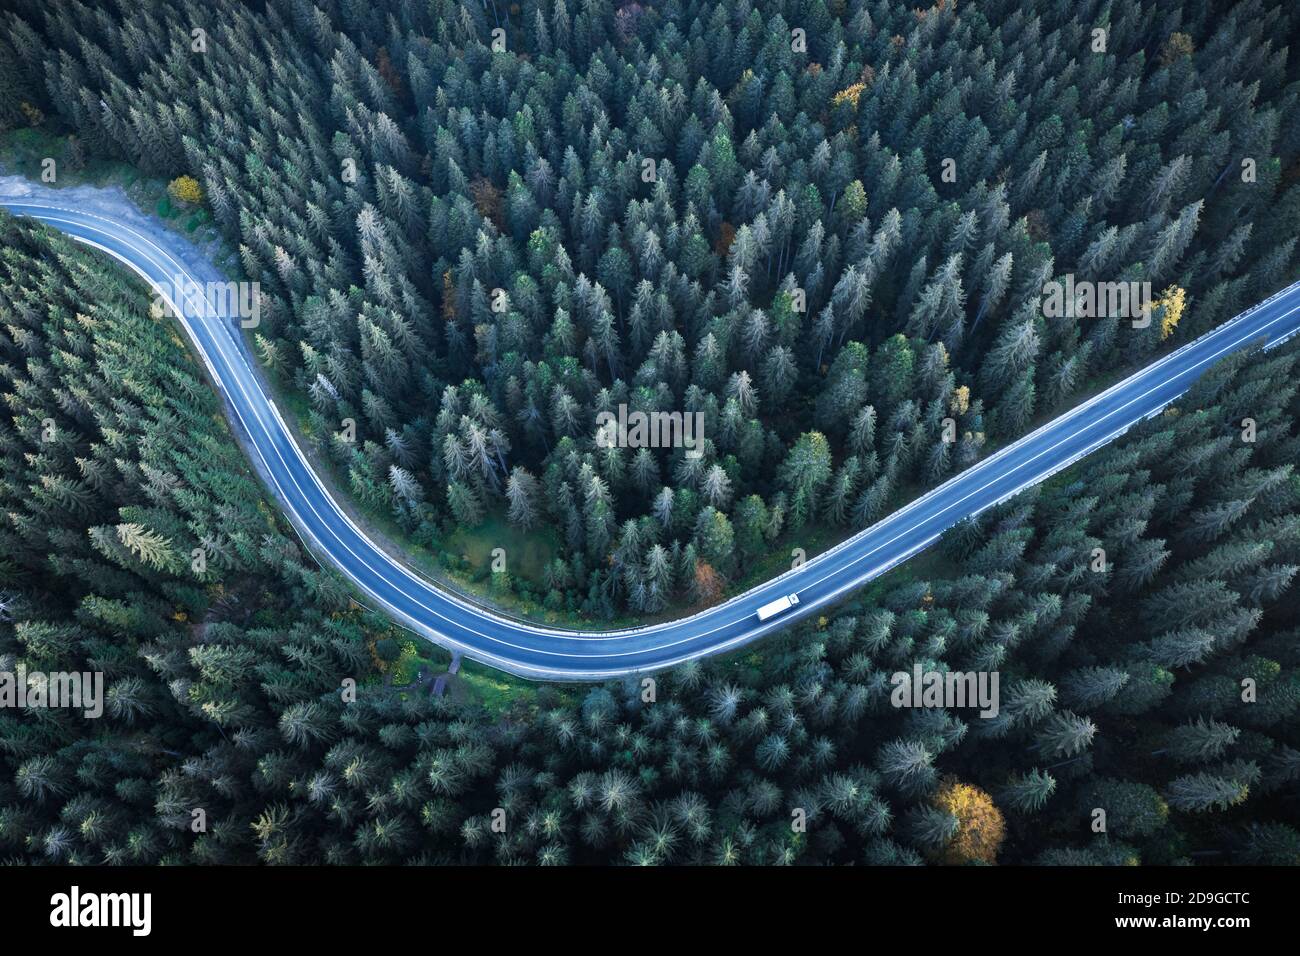 Flight over the autumn mountains with road serpentine and pine forest. Top down view. Landscape photography Stock Photo